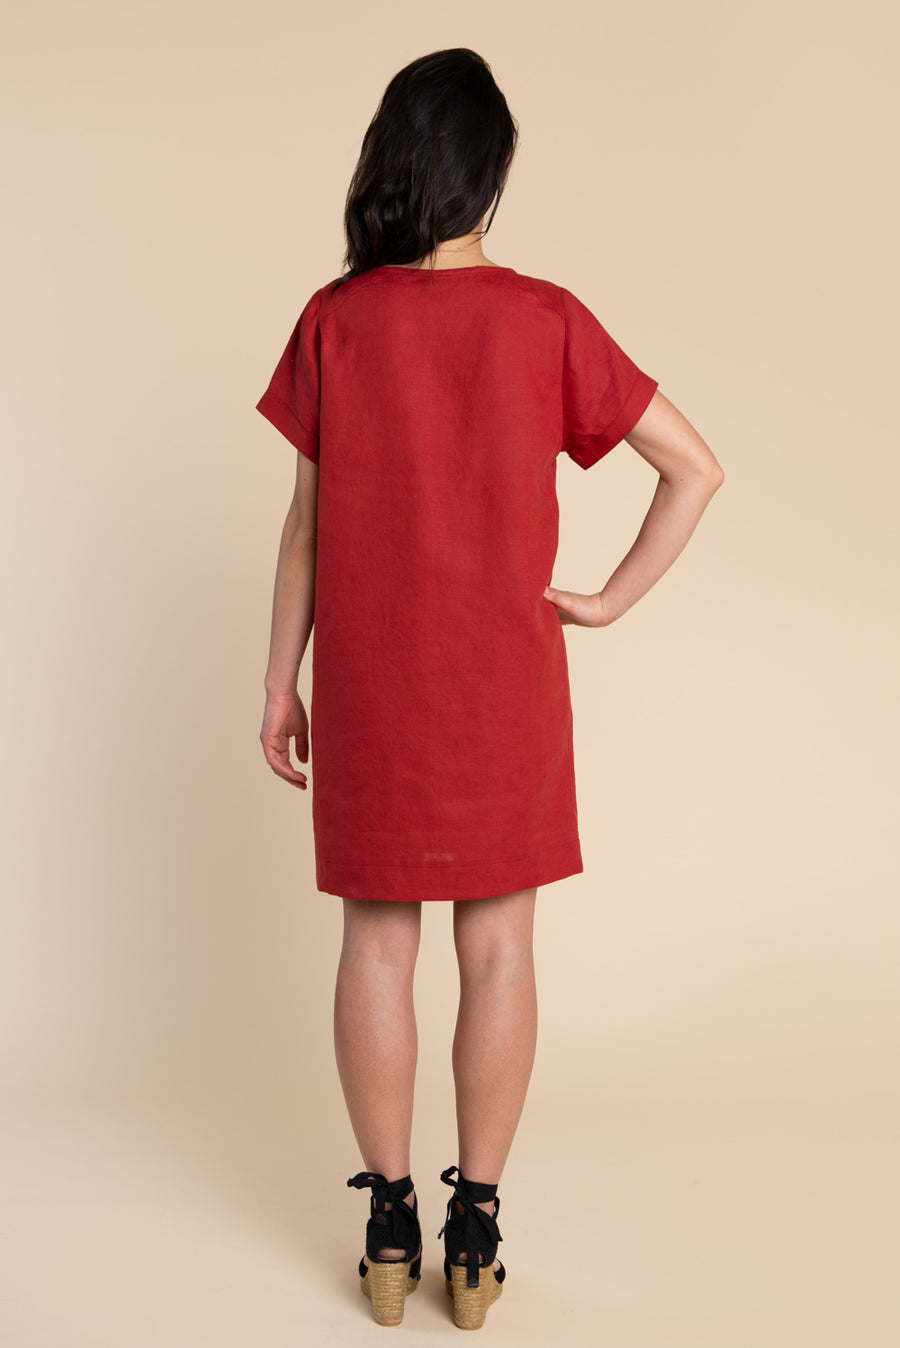 Cielo Top & Dress Sewing Pattern - Dress with inseam pockets | Closet Core Patterns